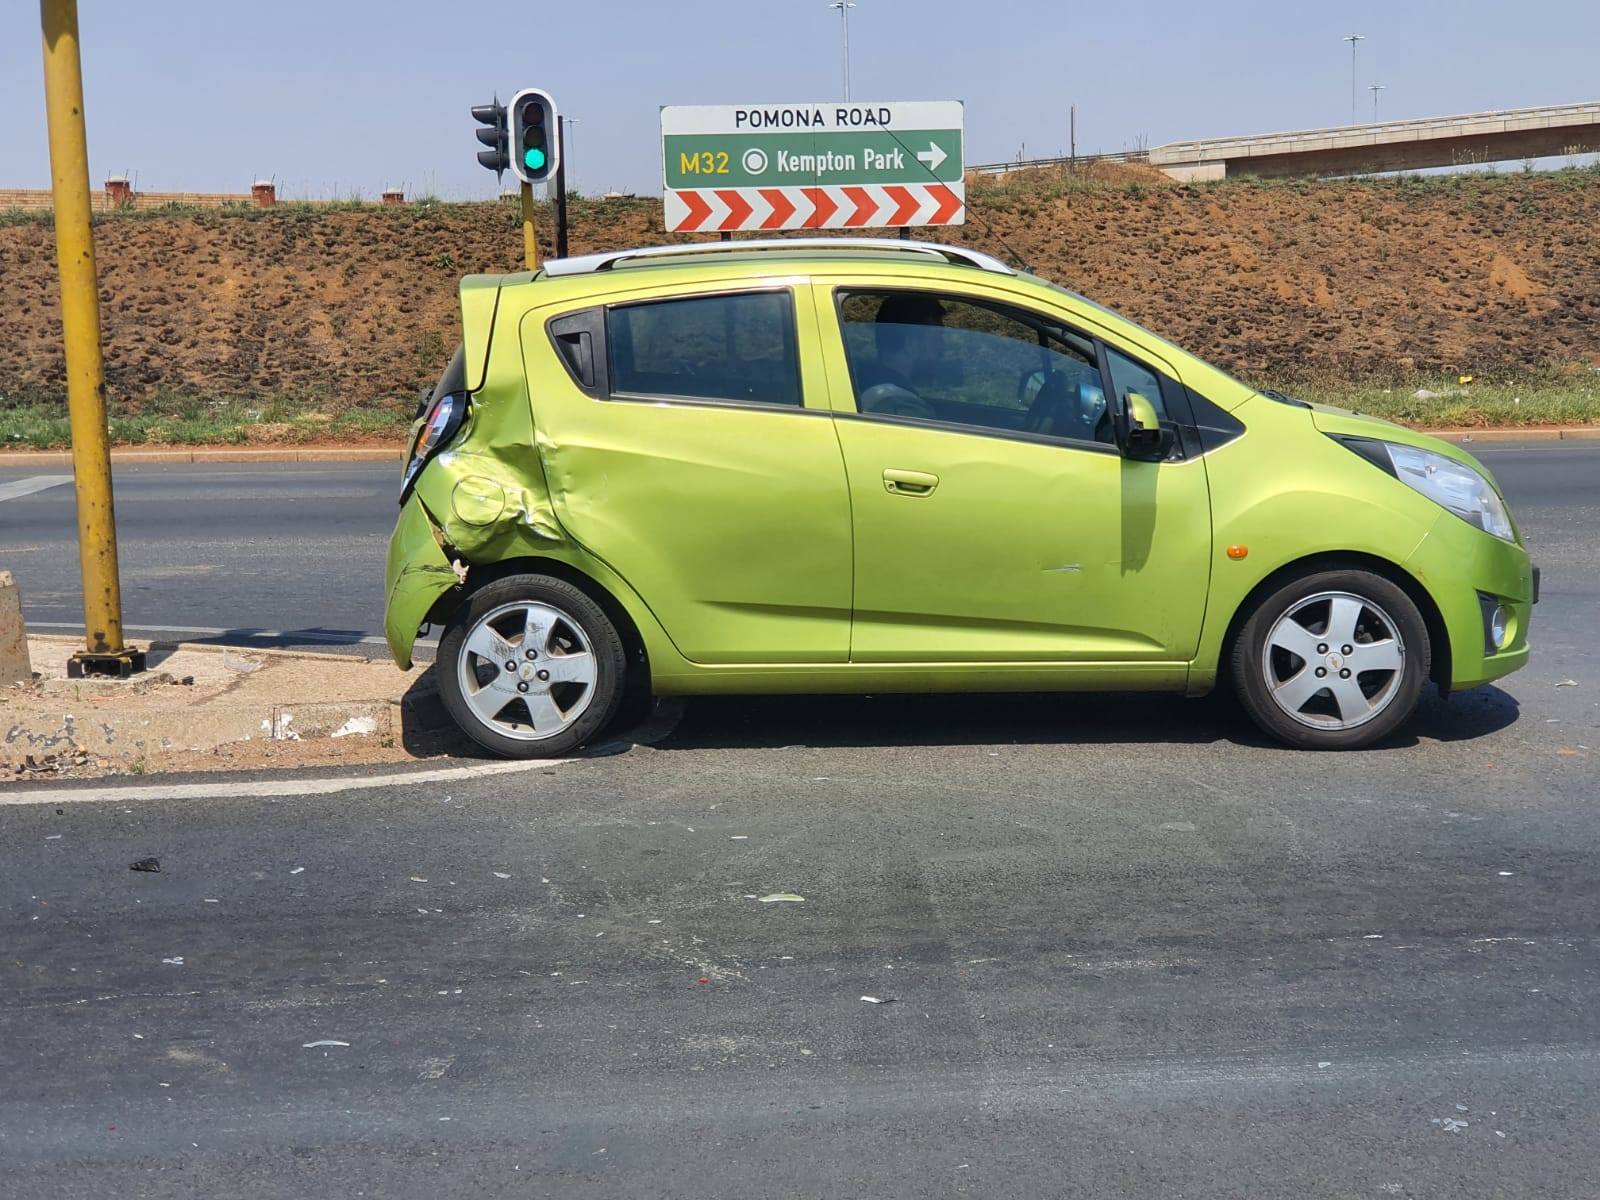 No injuries in a road crash at an intersection in Kempton Park